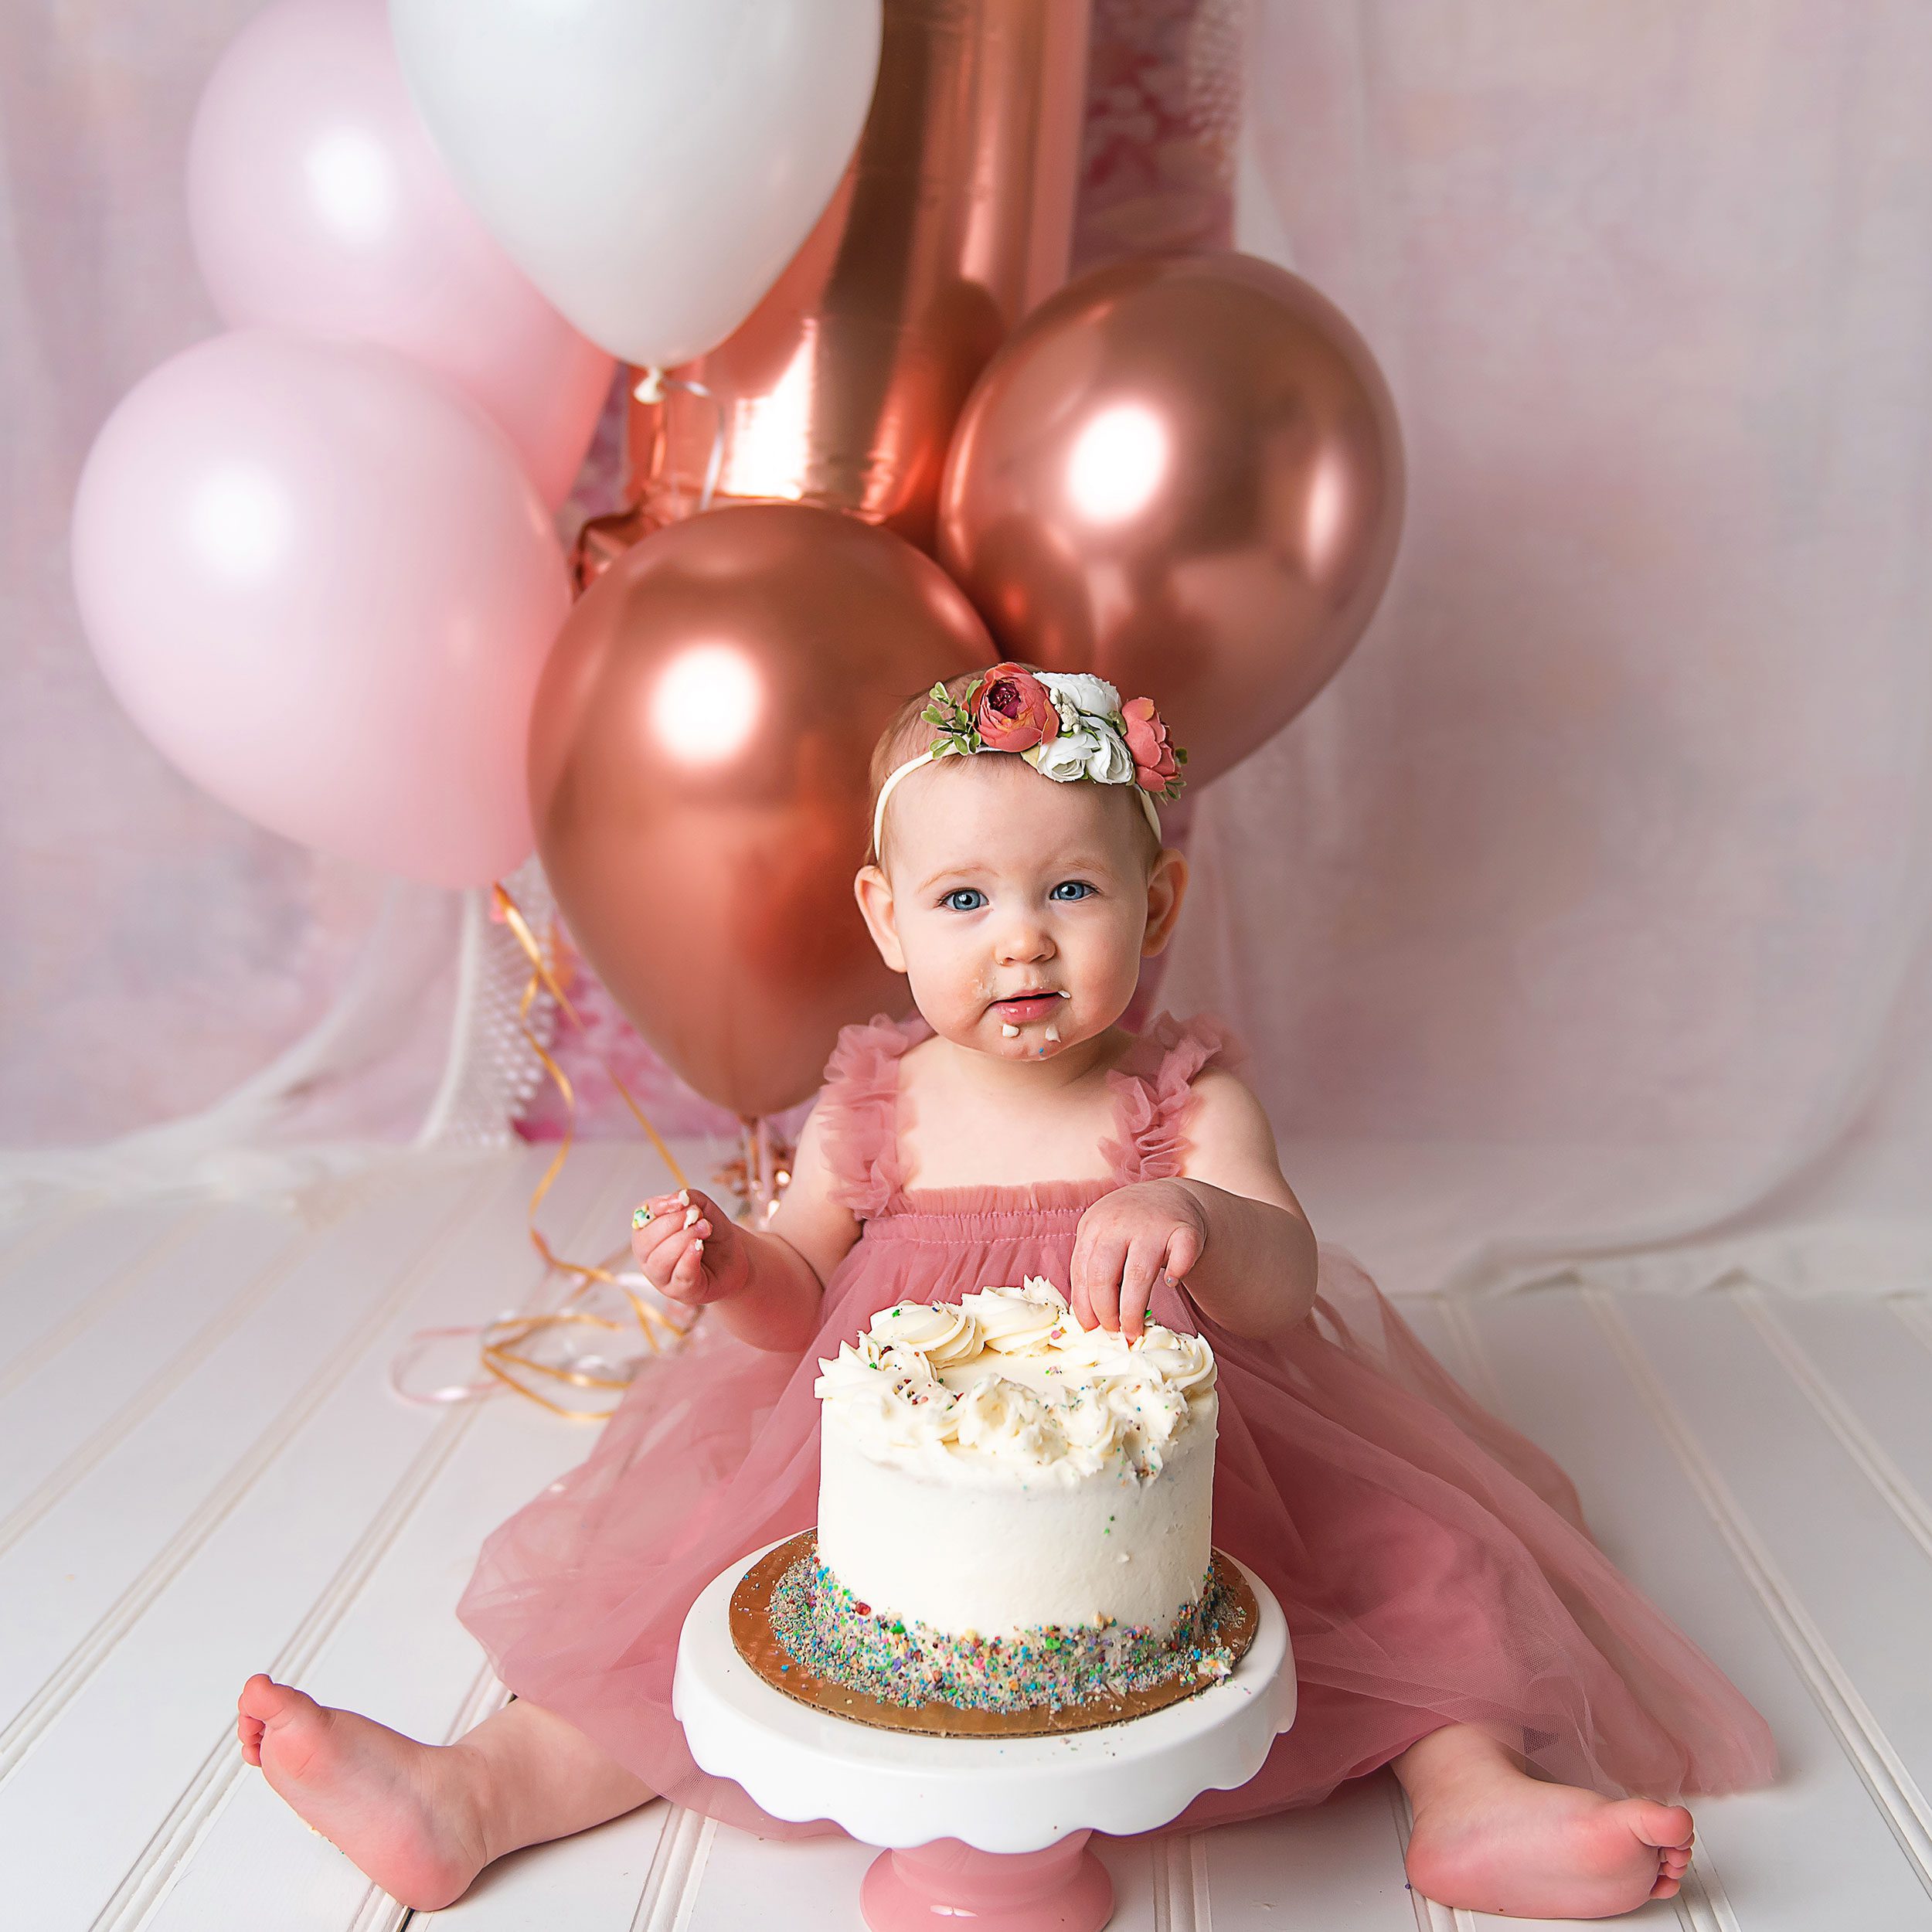 Cake Smash South East London - First Birthday Photoshoots